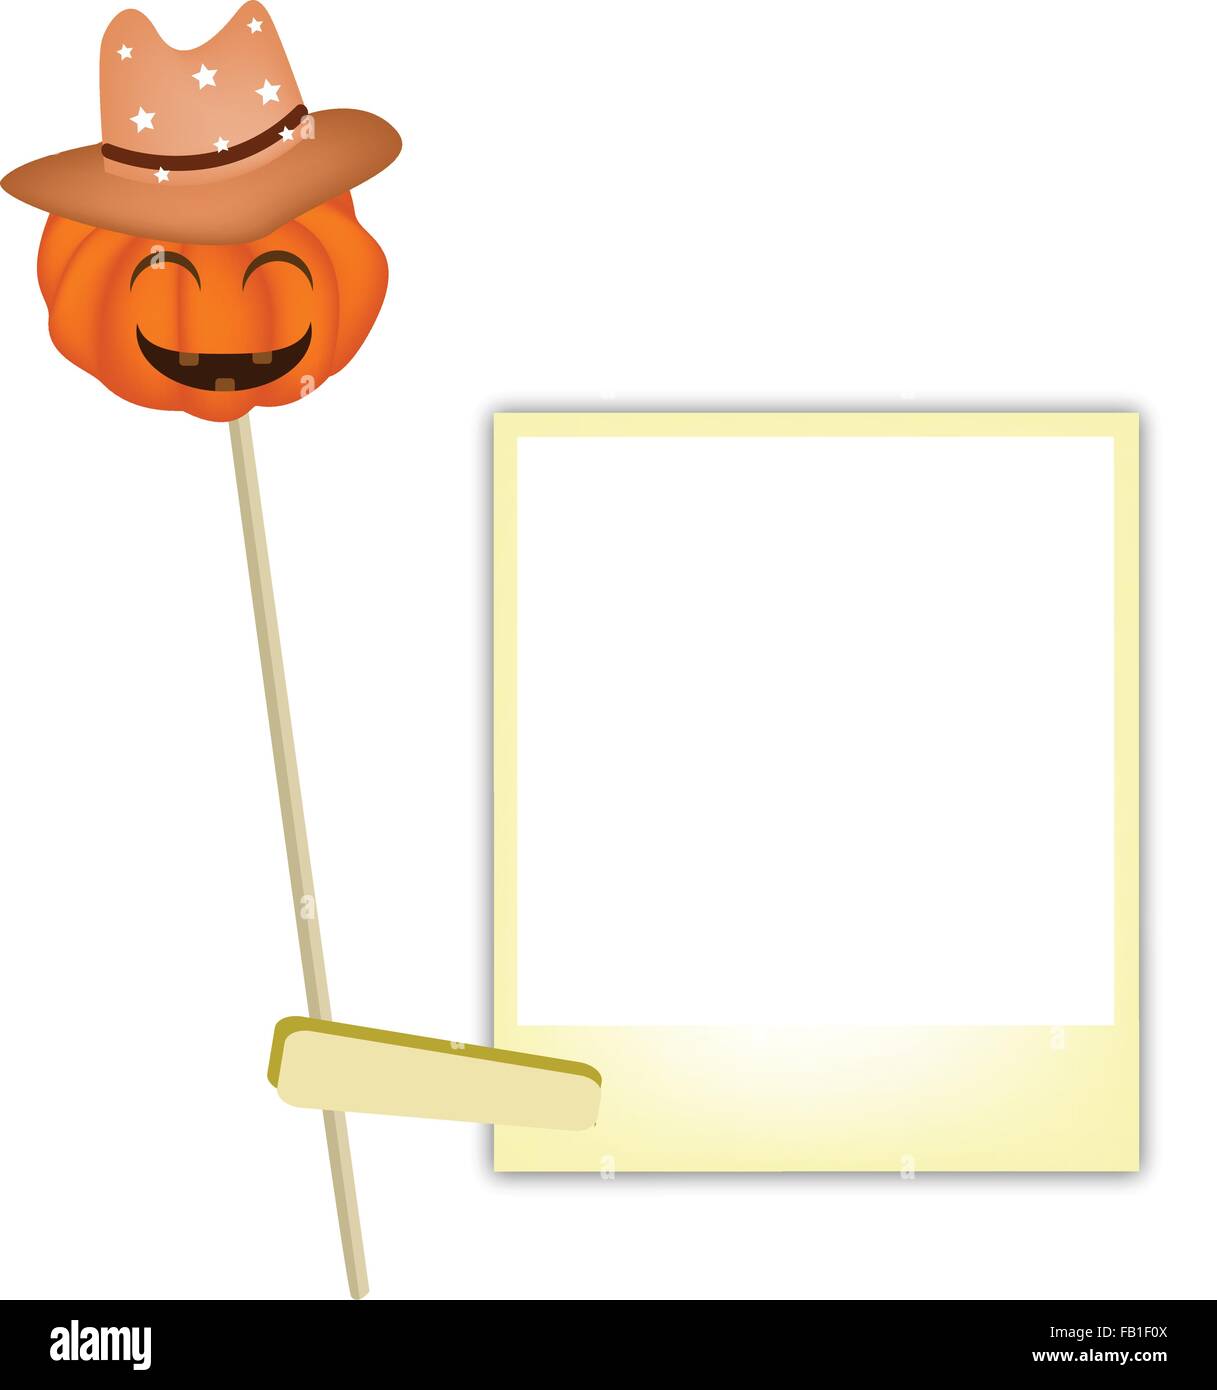 Illustration of A Happy Jack-o-Lantern Pumpkin Wearing A Brown Cowboy Hat with Blank Instant Photo Prints, For Halloween Celebra Stock Vector